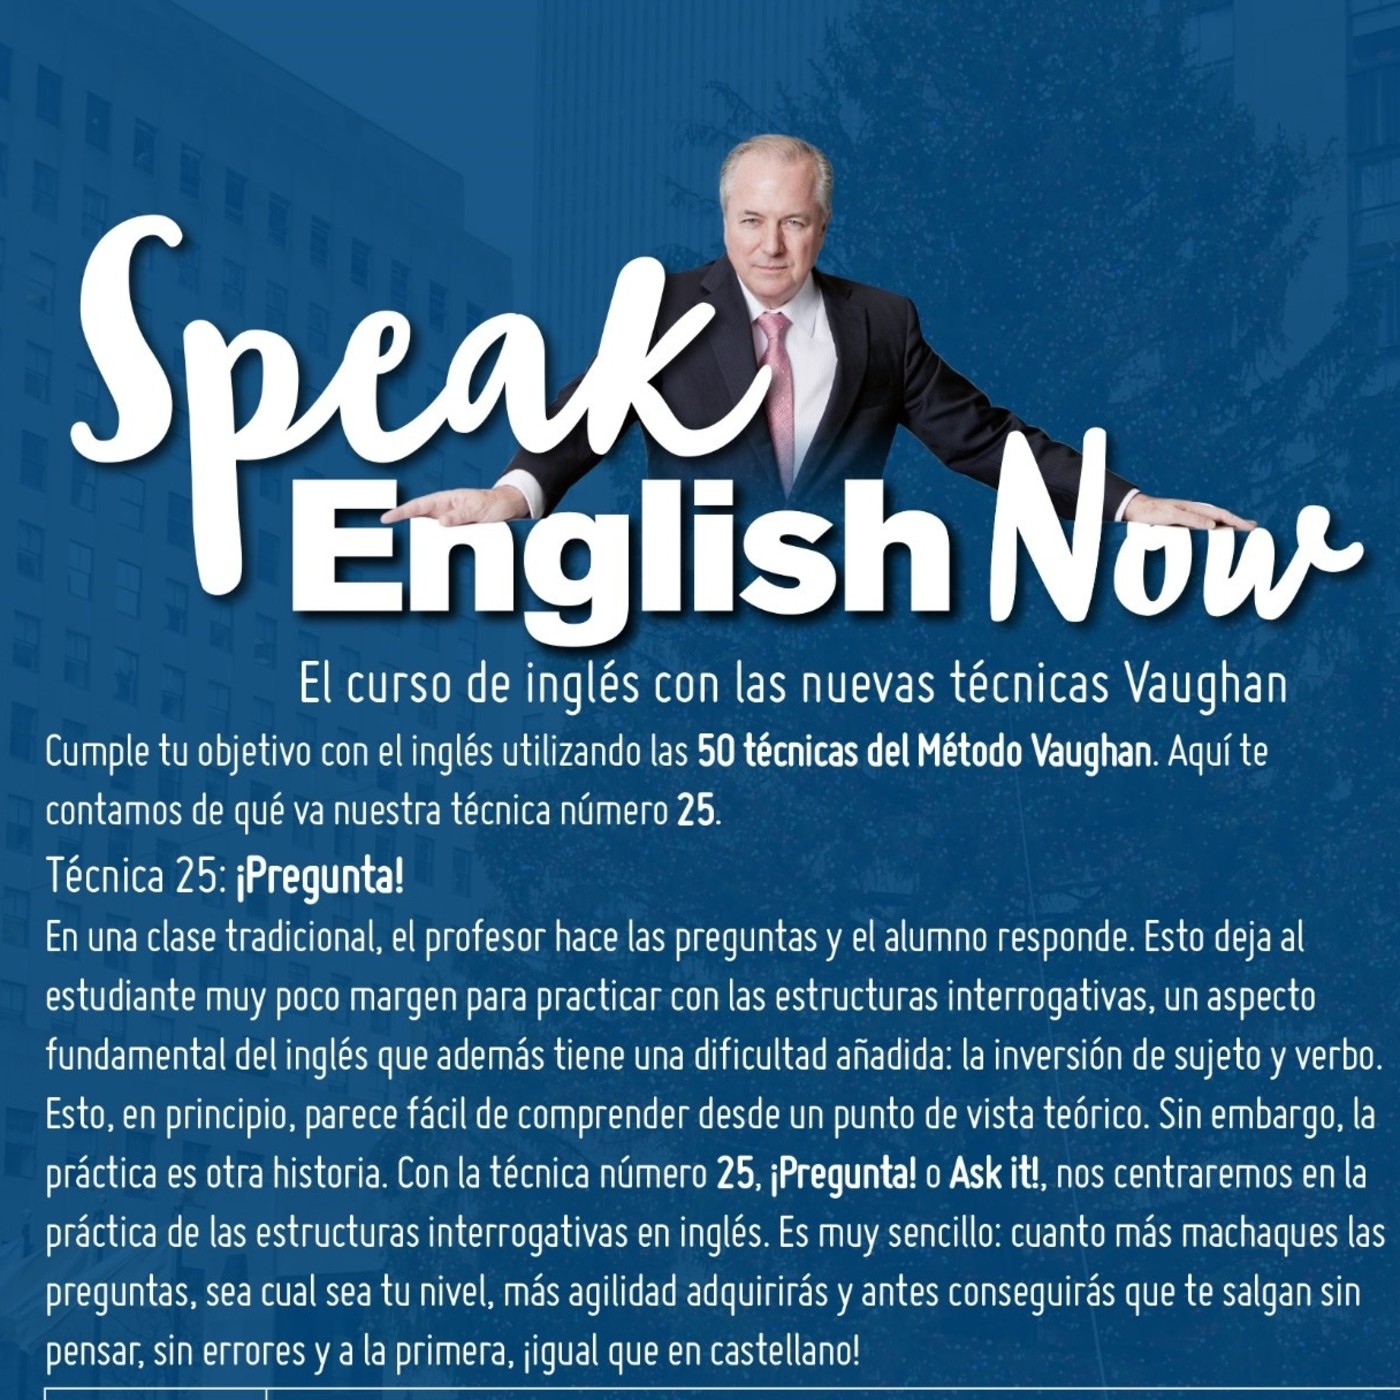 Speak English Now by Vaughan Libro 20